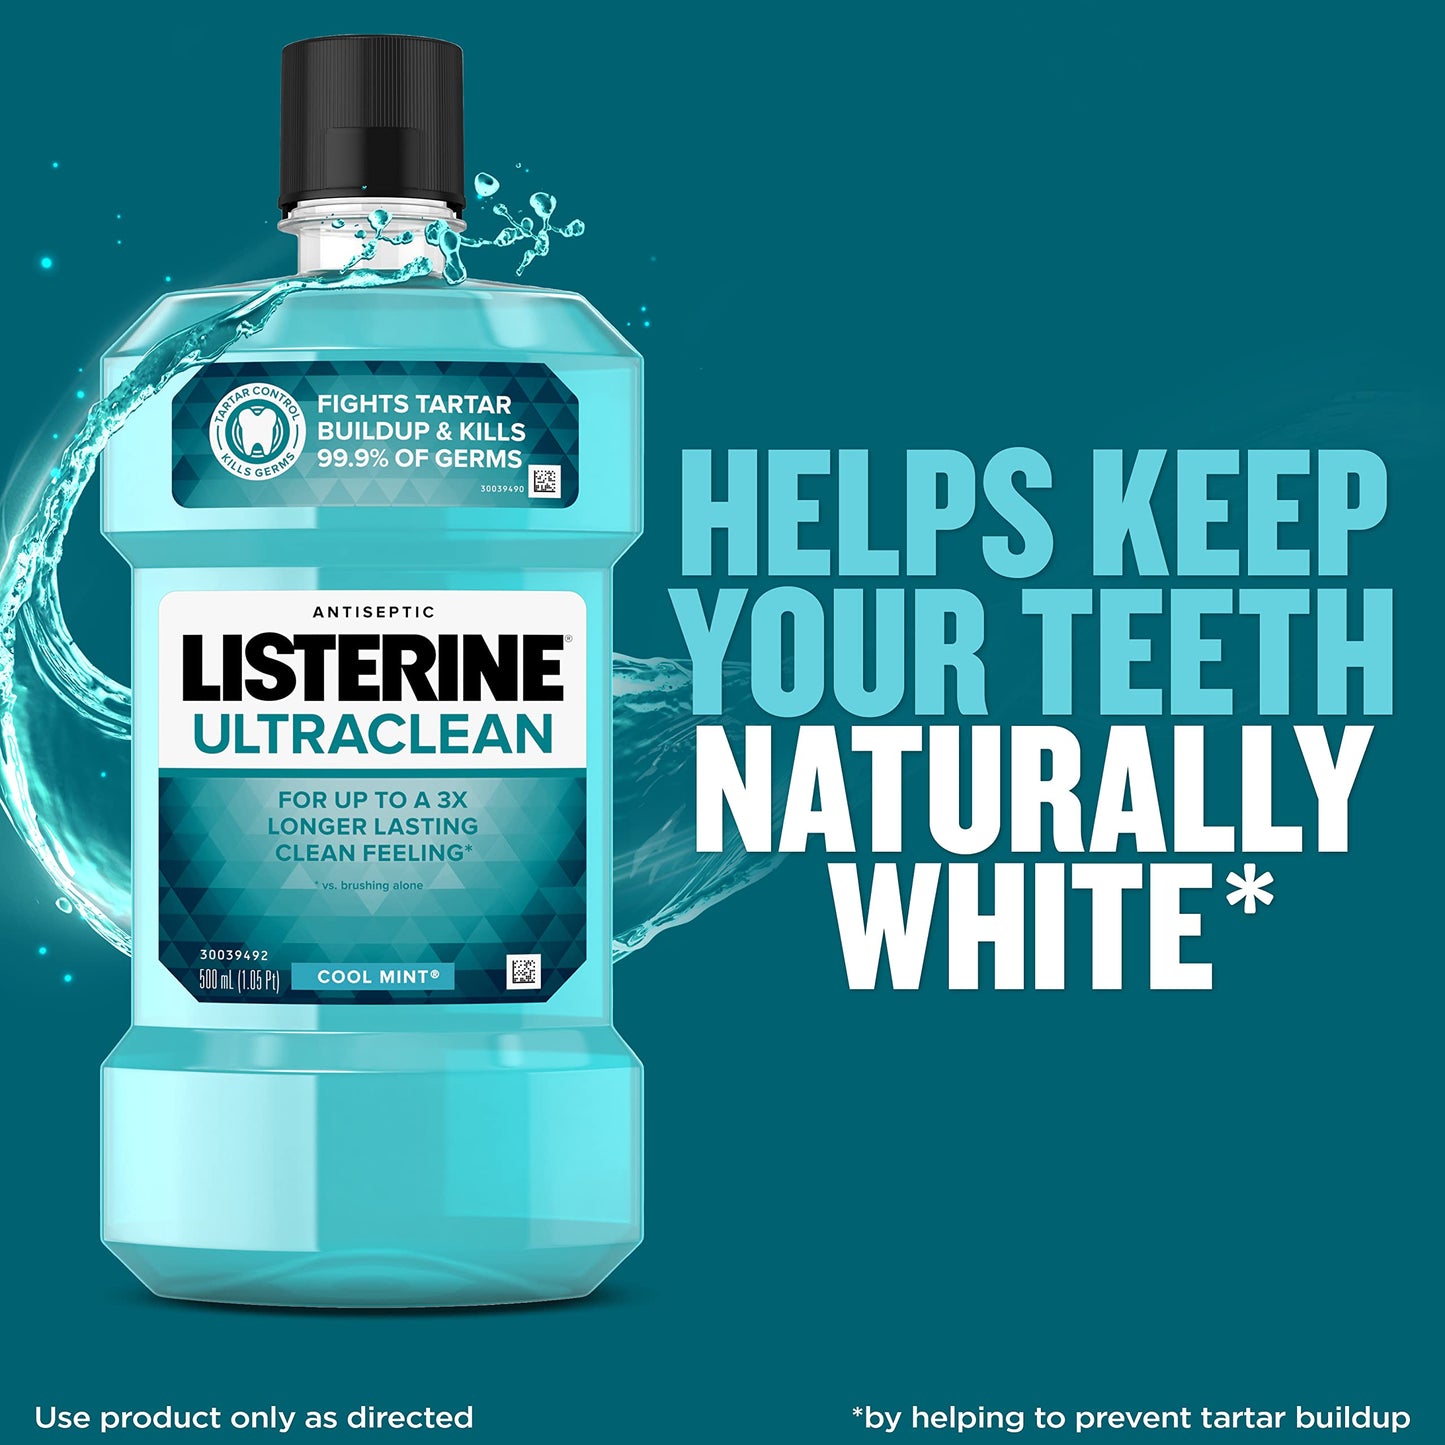 Listerine Ultraclean Oral Care Antiseptic Mouthwash, Everfresh to Help Fight Bad Breath, Gingivitis, Plaque & Tartar, ADA-Accepted Oral Rinse, Cool Mint, 1 L, Pack of 2